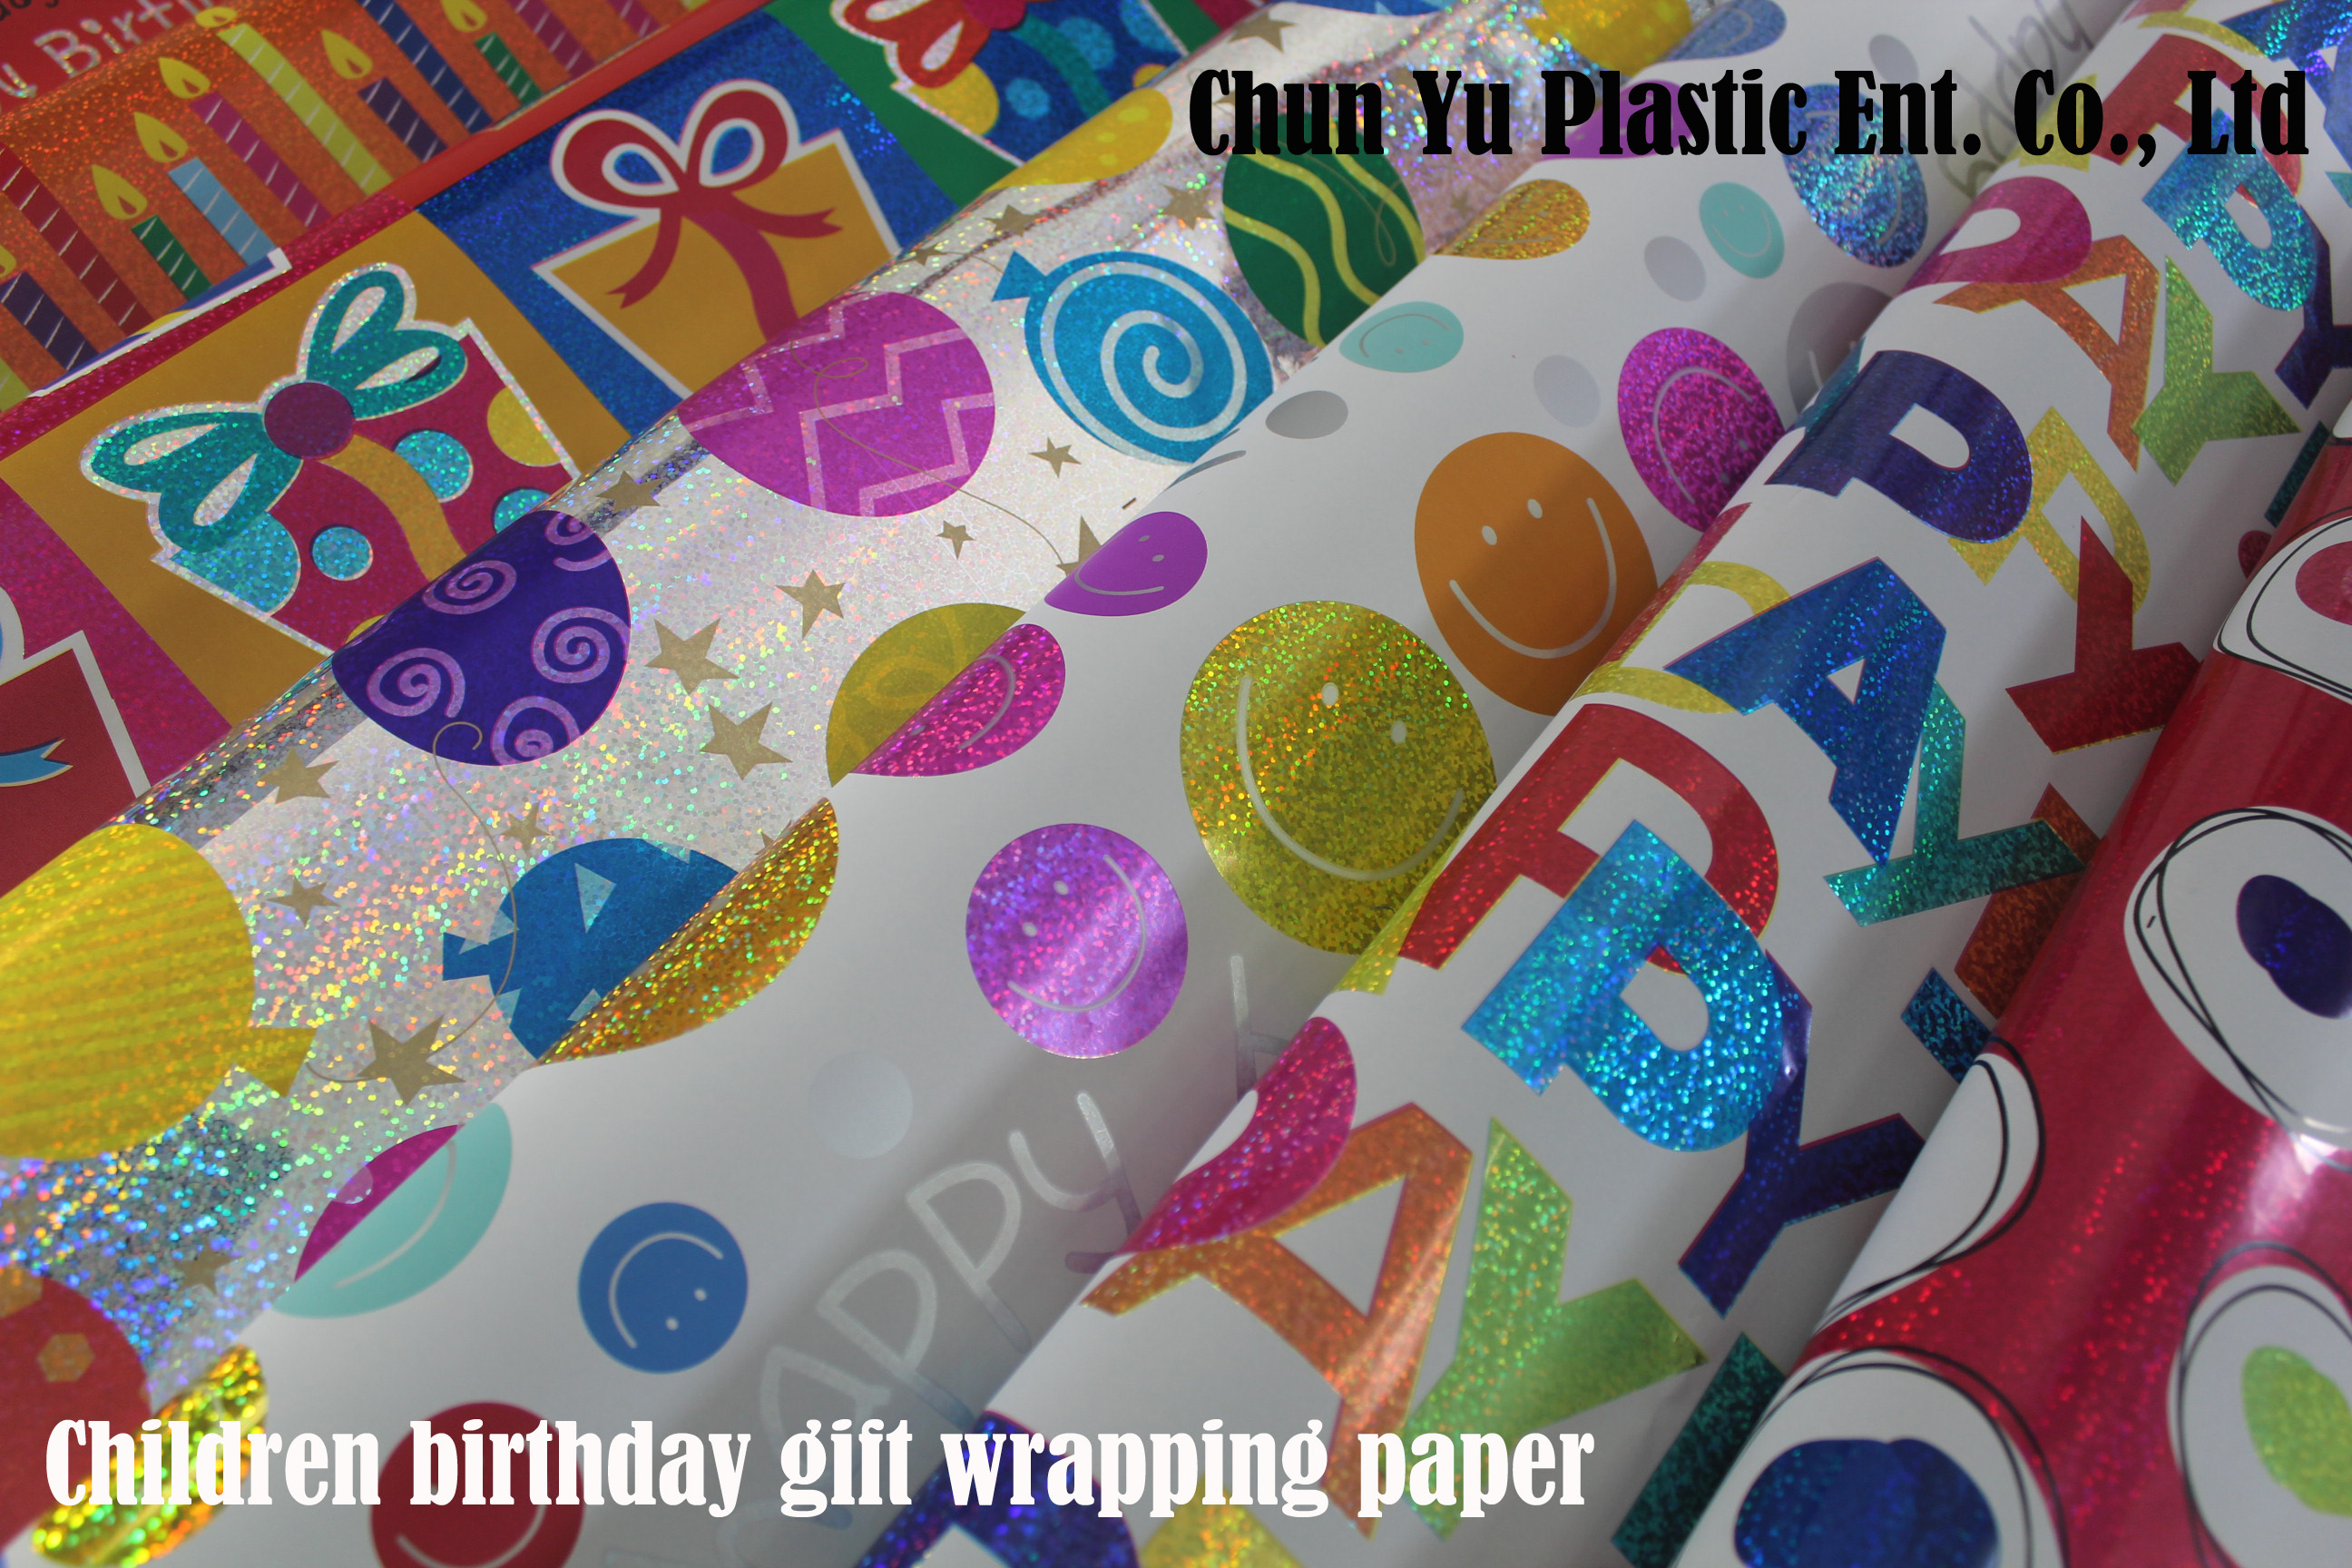 Premium custom printed gift wrapping paper for kids, children, boys, girls and birthday presents packaging directly from factory